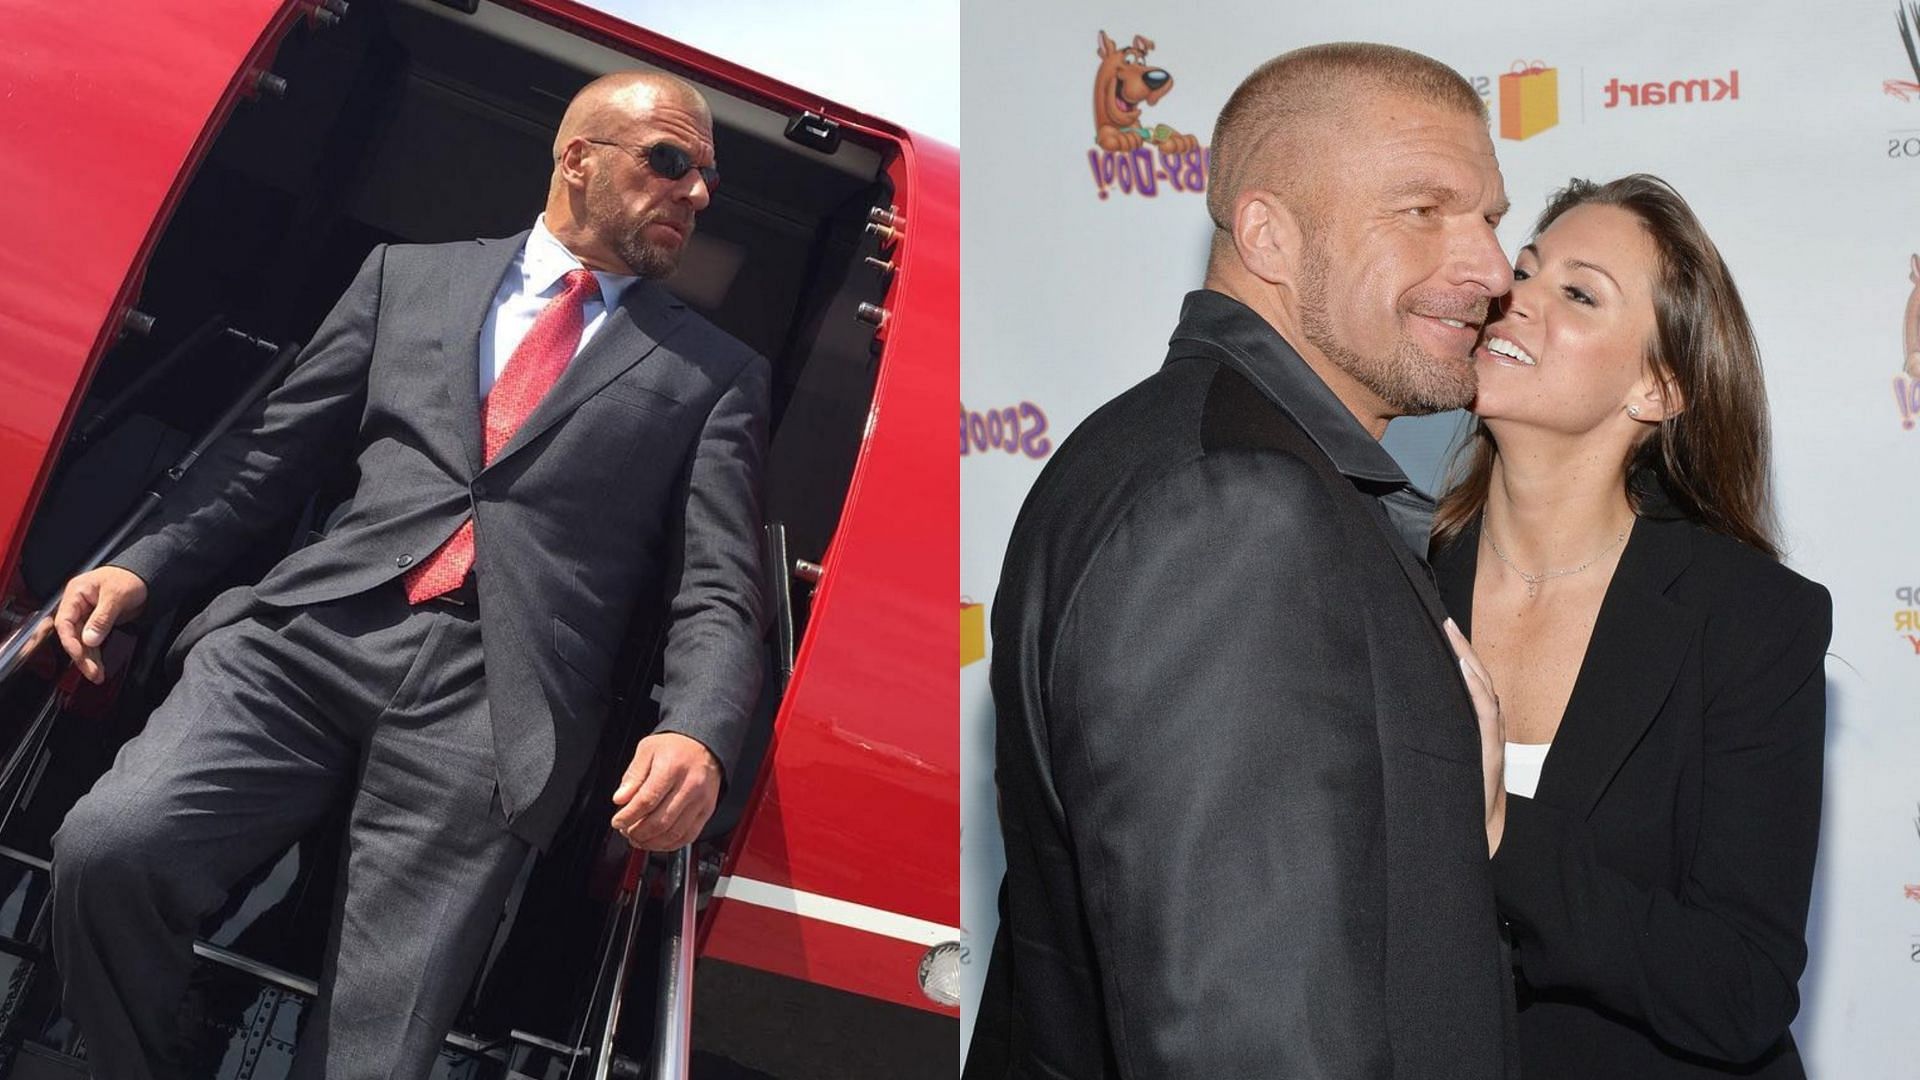 WWE EVP Triple H with his wife, WWE Chairwoman and Co-CEO Stephanie McMahon